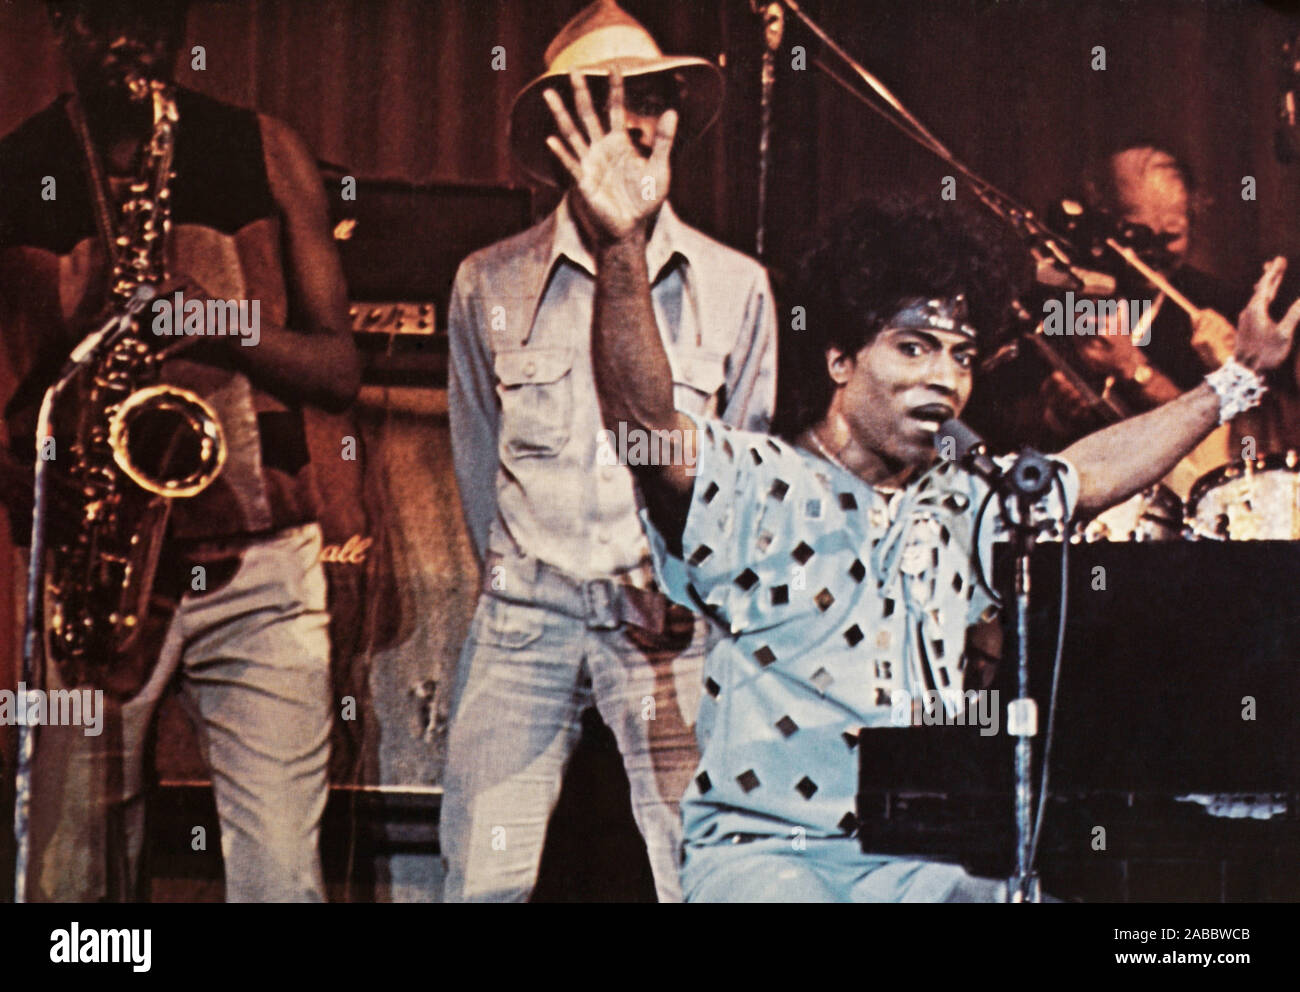 LET THE GOOD TIMES ROLL, Little Richard (seated), 1973 Stock Photo